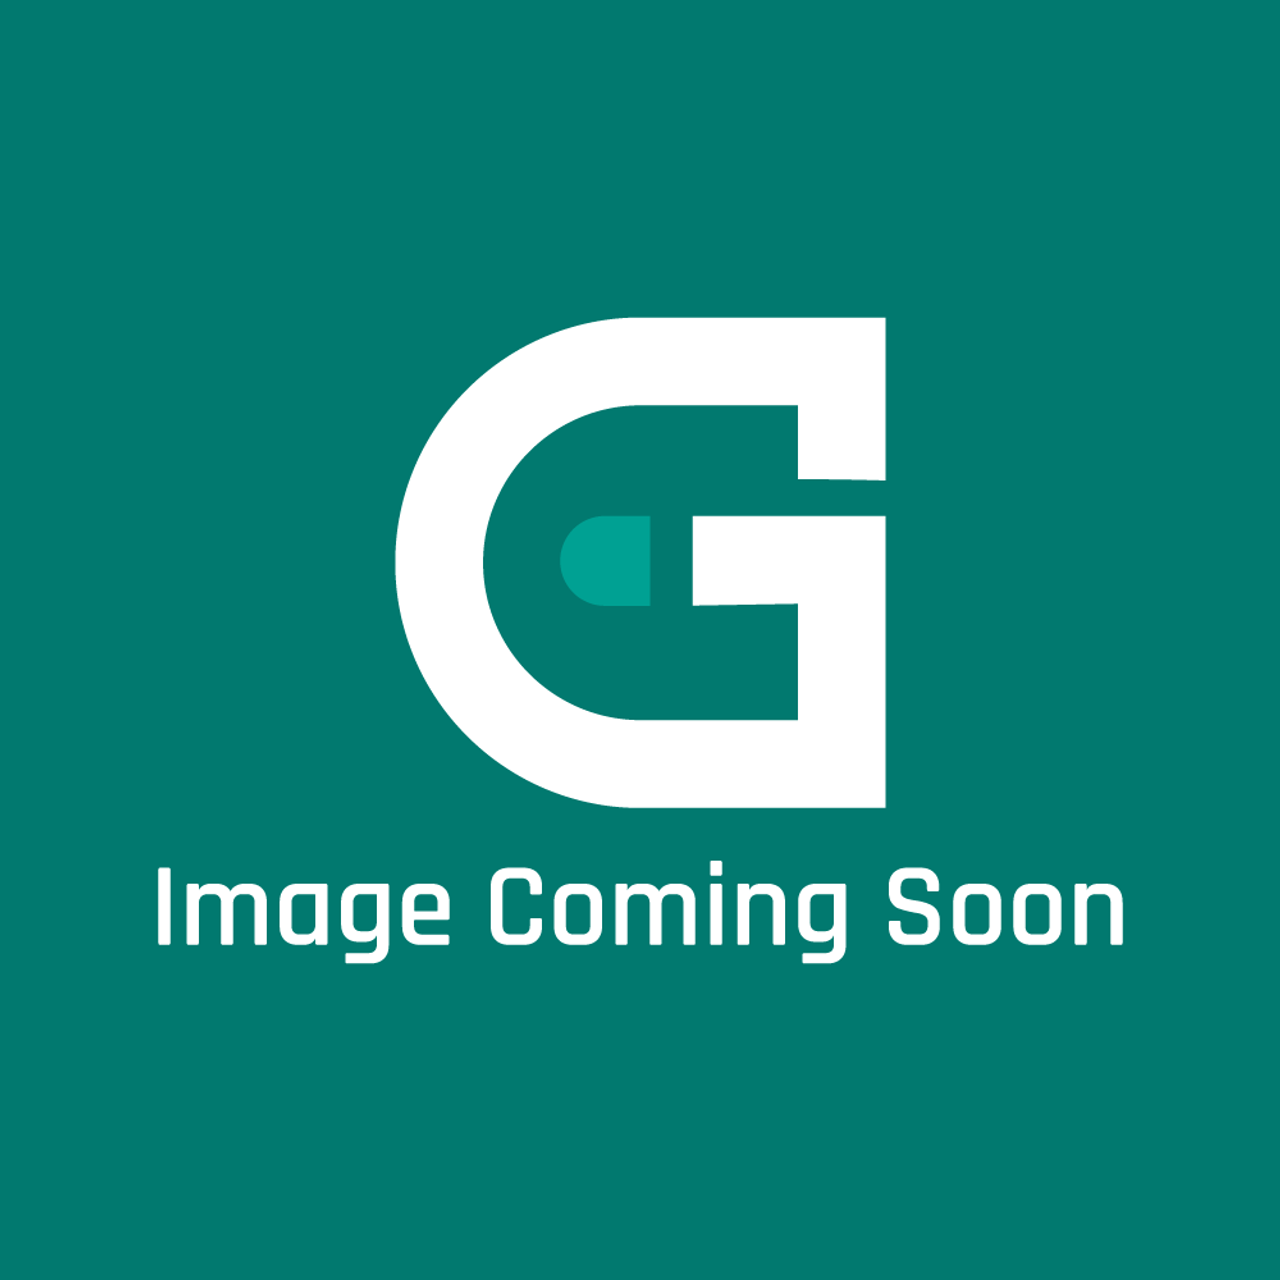 GE Appliances WB19T10097 - Valve Gas 270 - Image Coming Soon!